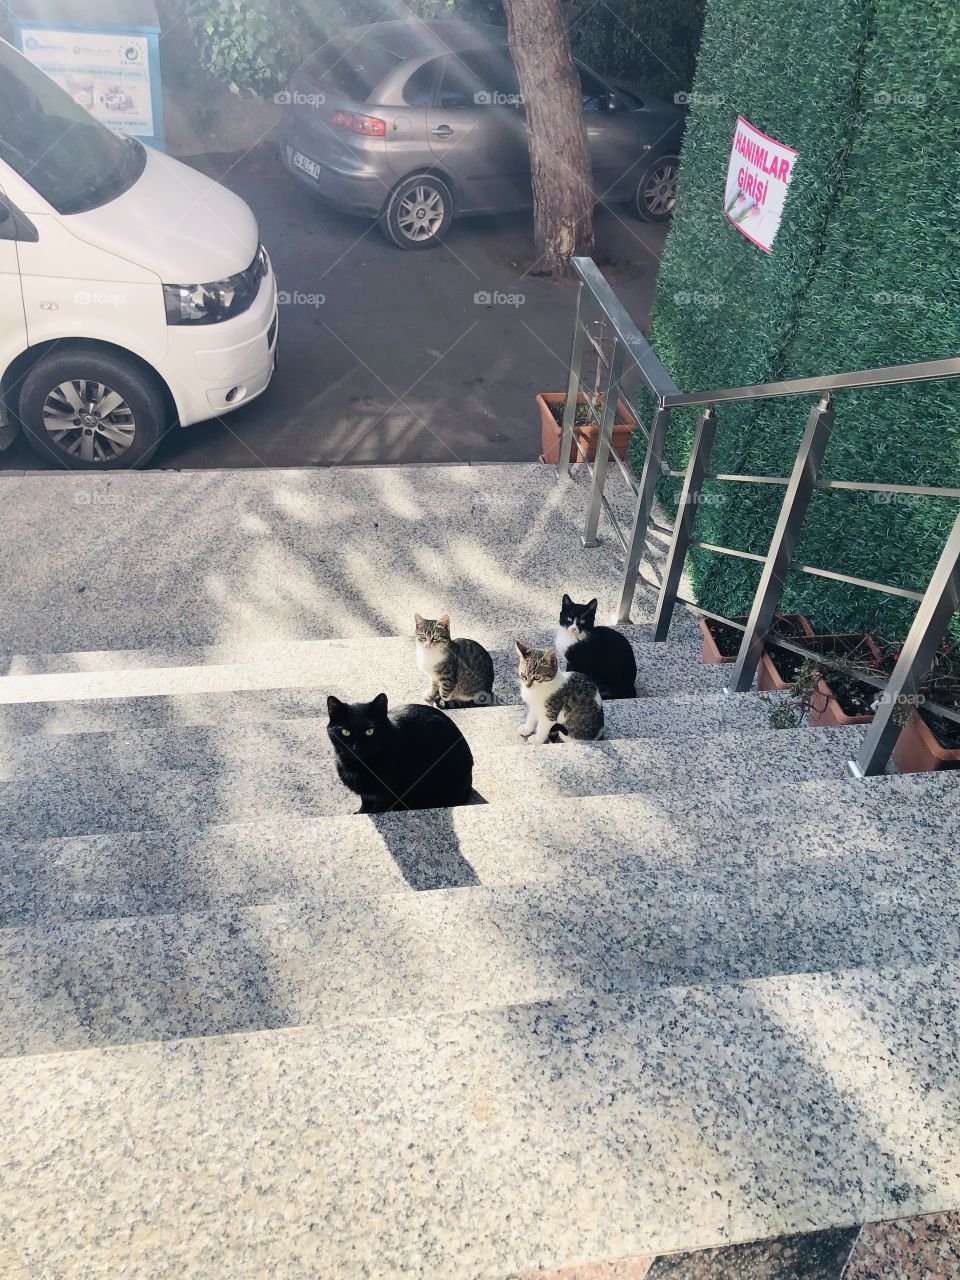 A mom cat with three kitten behind